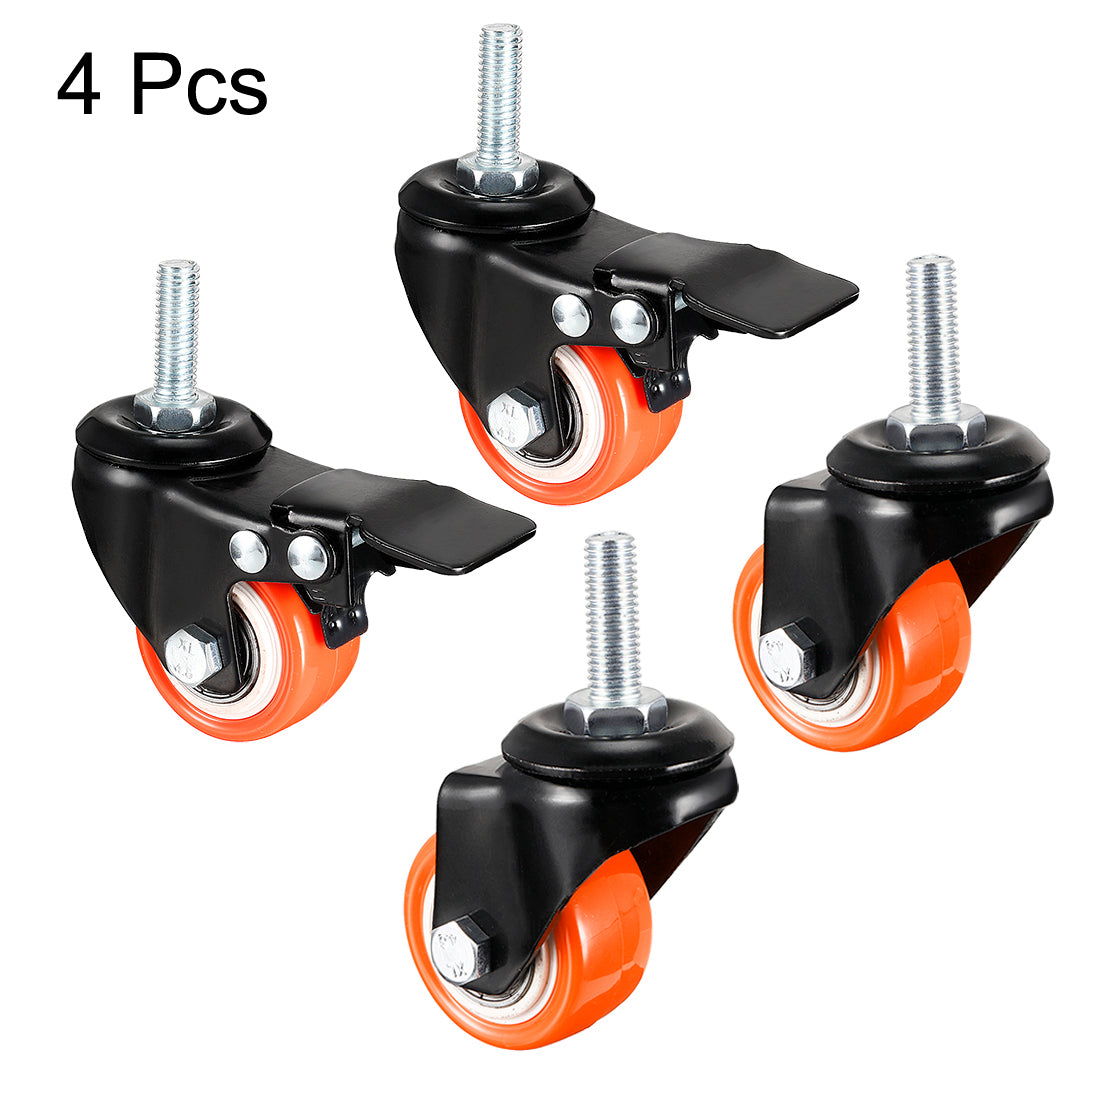 uxcell Uxcell 1.5 Inch Swivel Caster Wheels PU 360 Degree Threaded Stem Caster Wheel M10 x 25mm 110lb Capacity 4 Pcs (Two with Brake, Two No Brake)